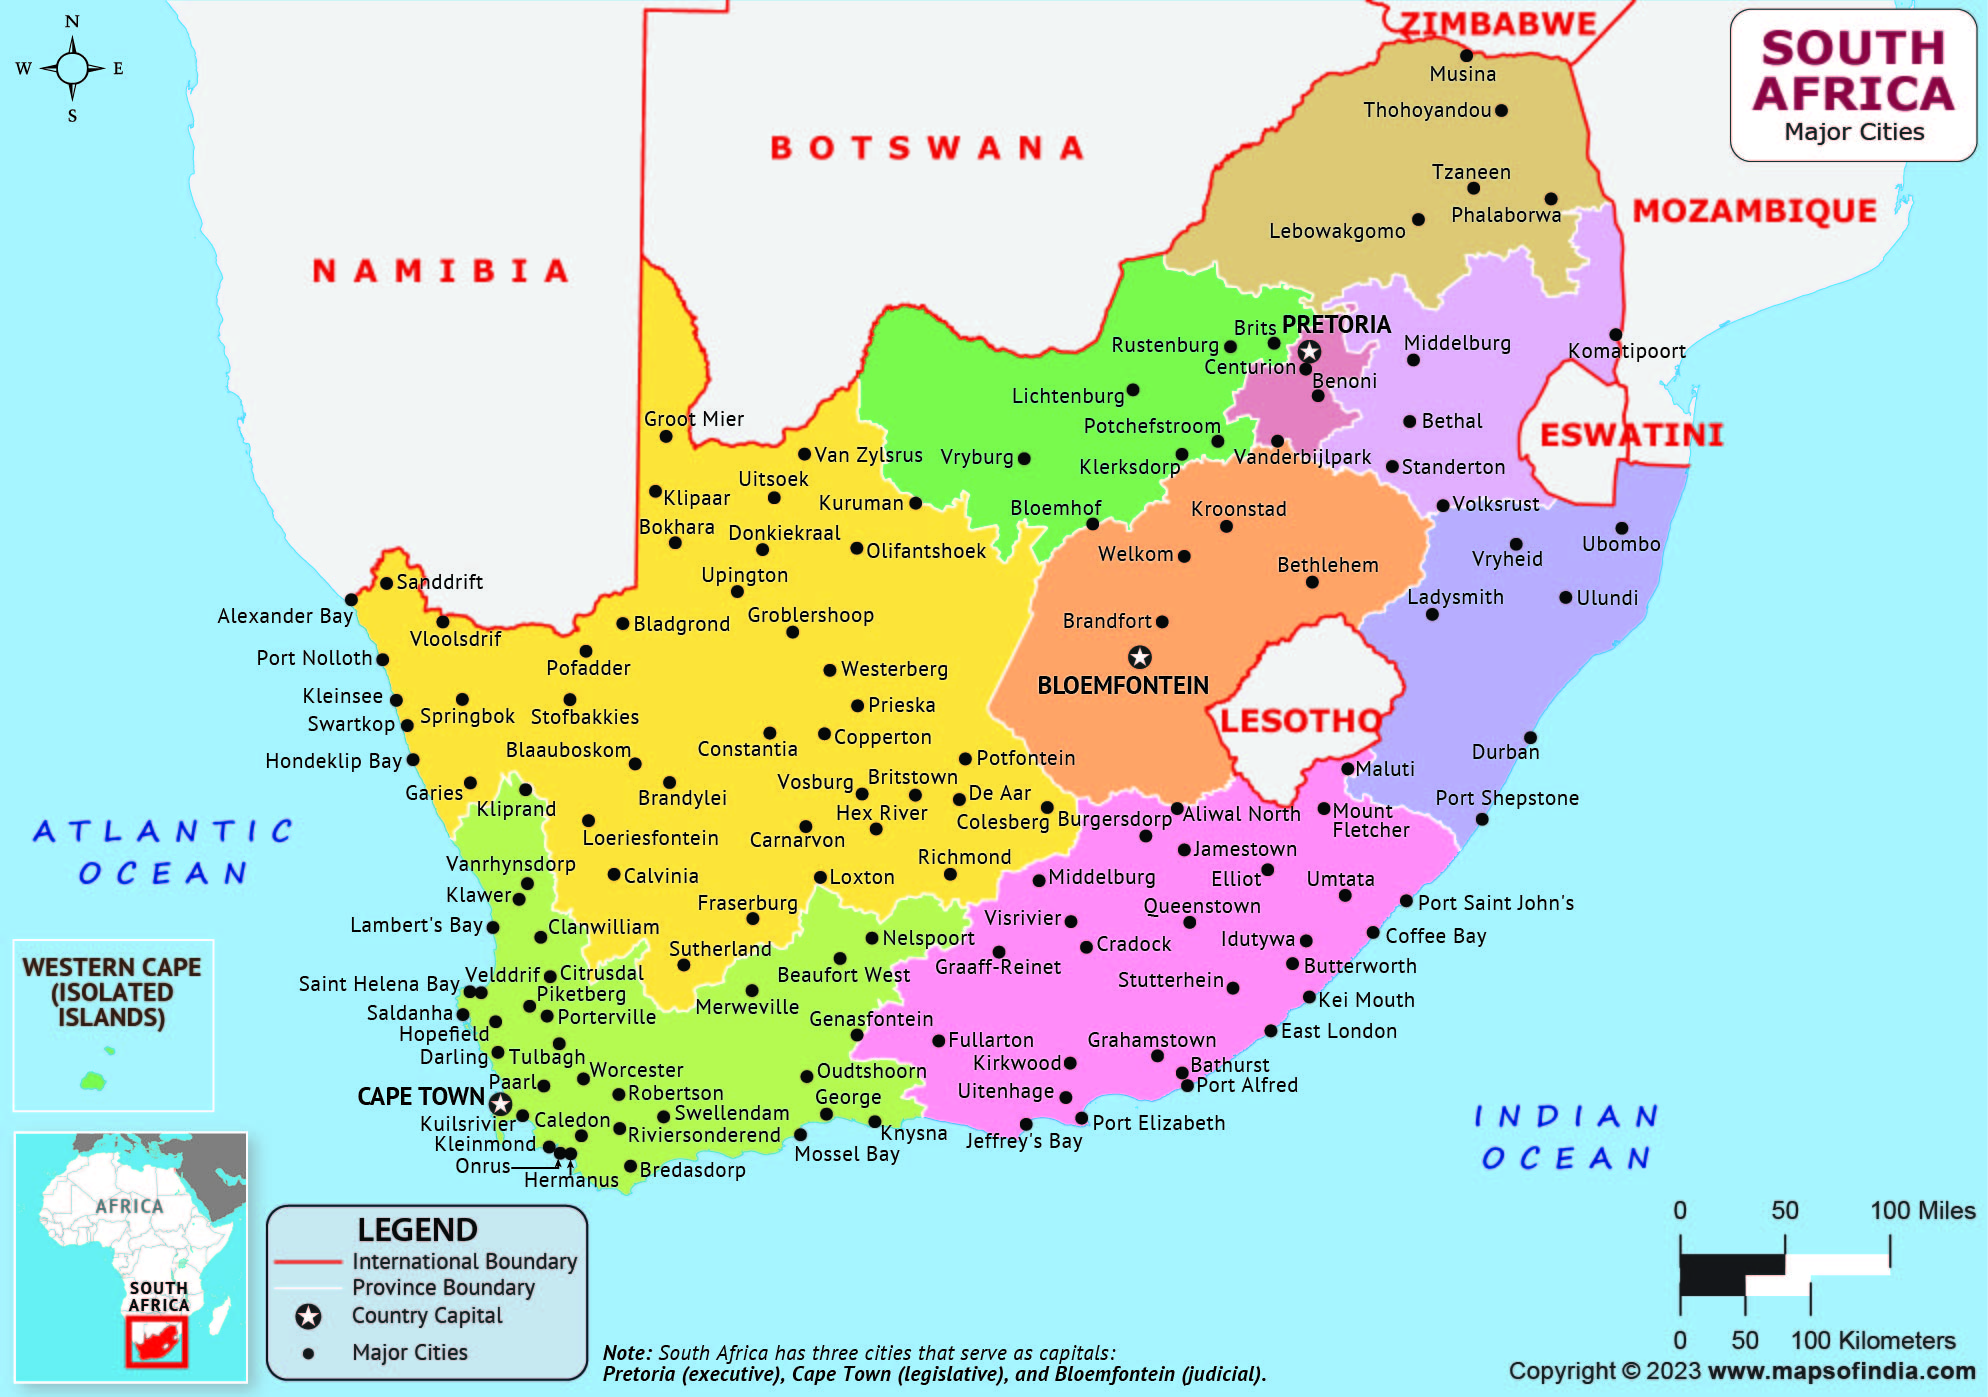 South Africa Major Cities Map | List of Major Cities in Different ...